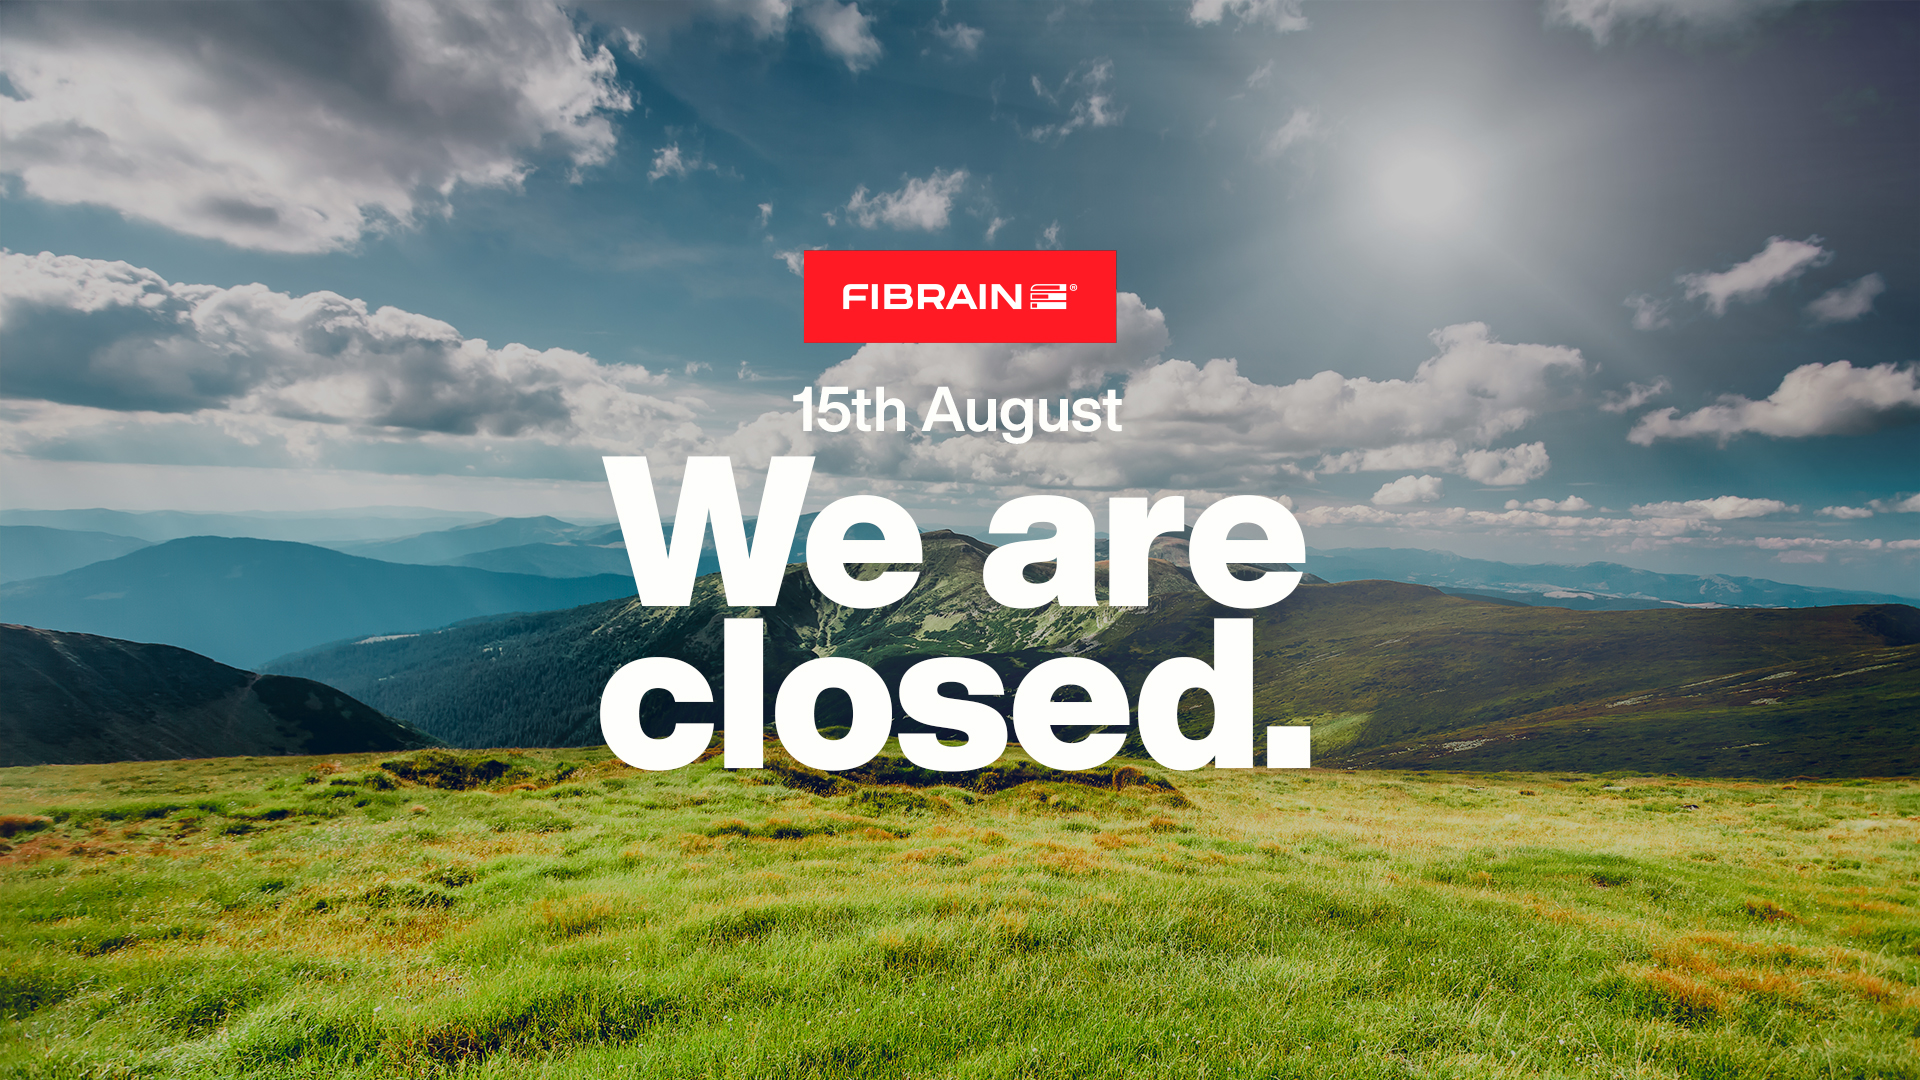 FIBRAIN is closed on 15th August